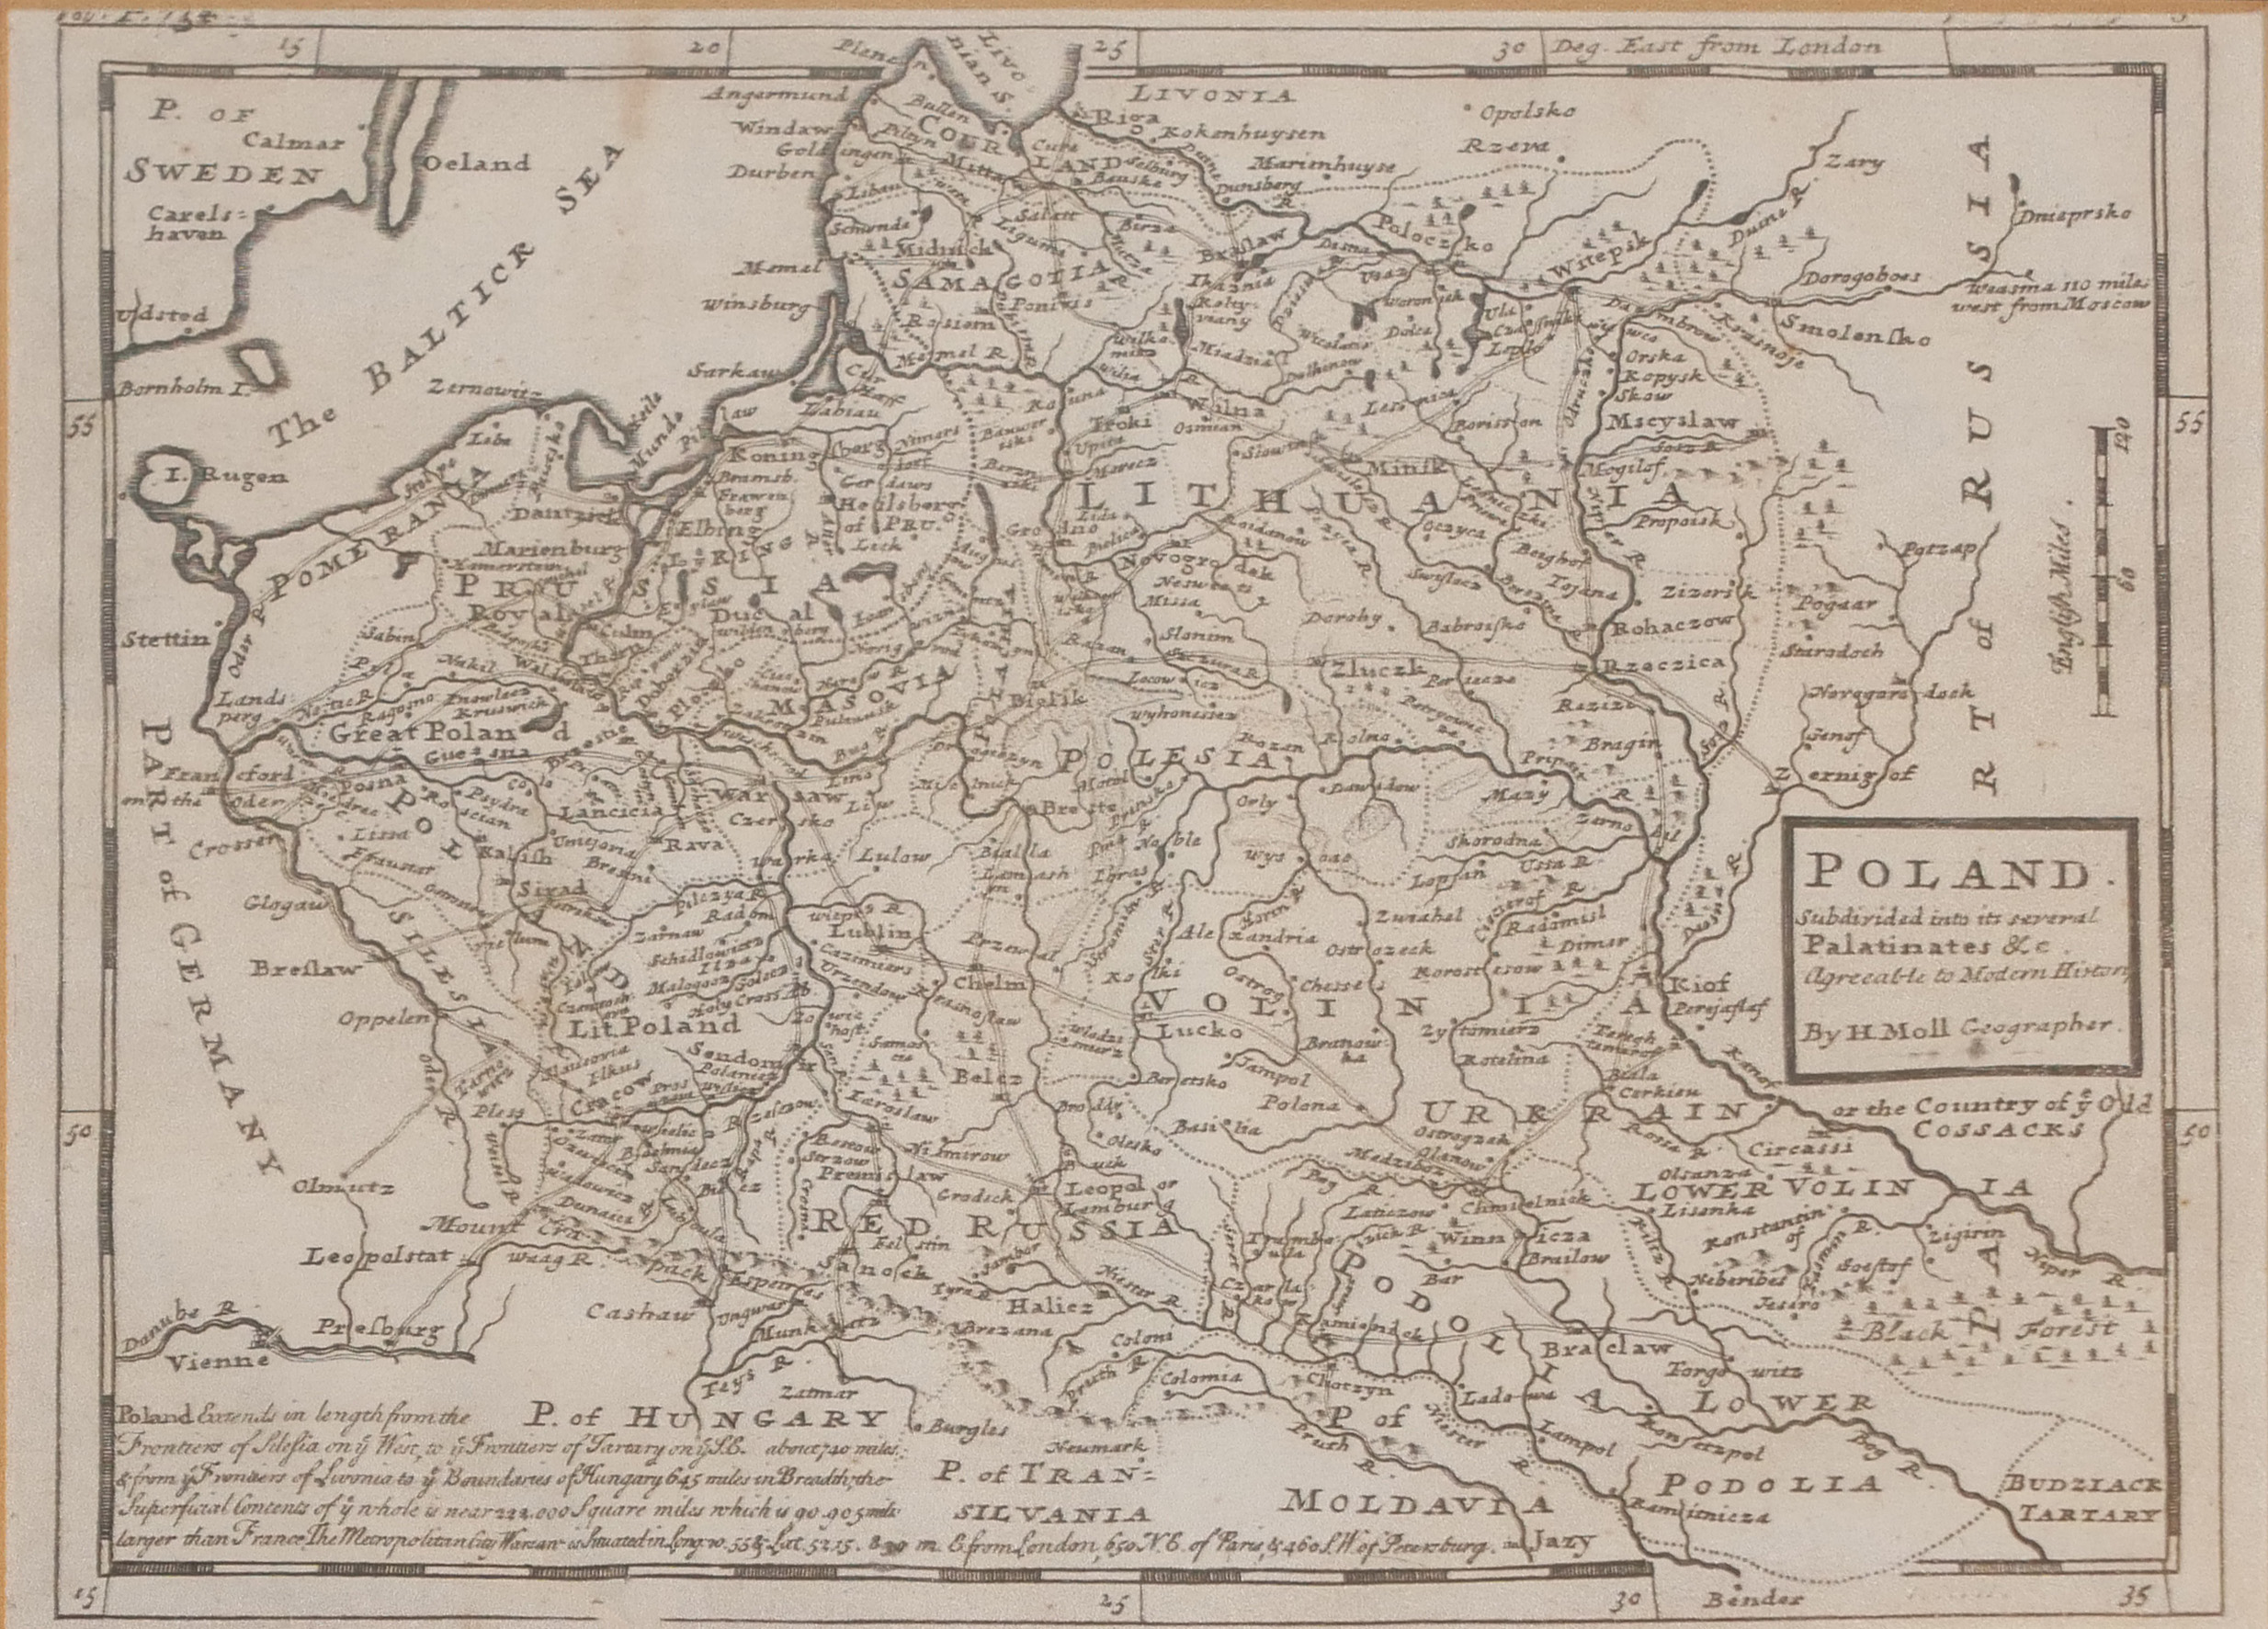 H. MOLL, AN EARLY 18TH CENTURY BLACK AND WHITE ENGRAVING, MAP OF POLAND Titled 'Poland Subdivided